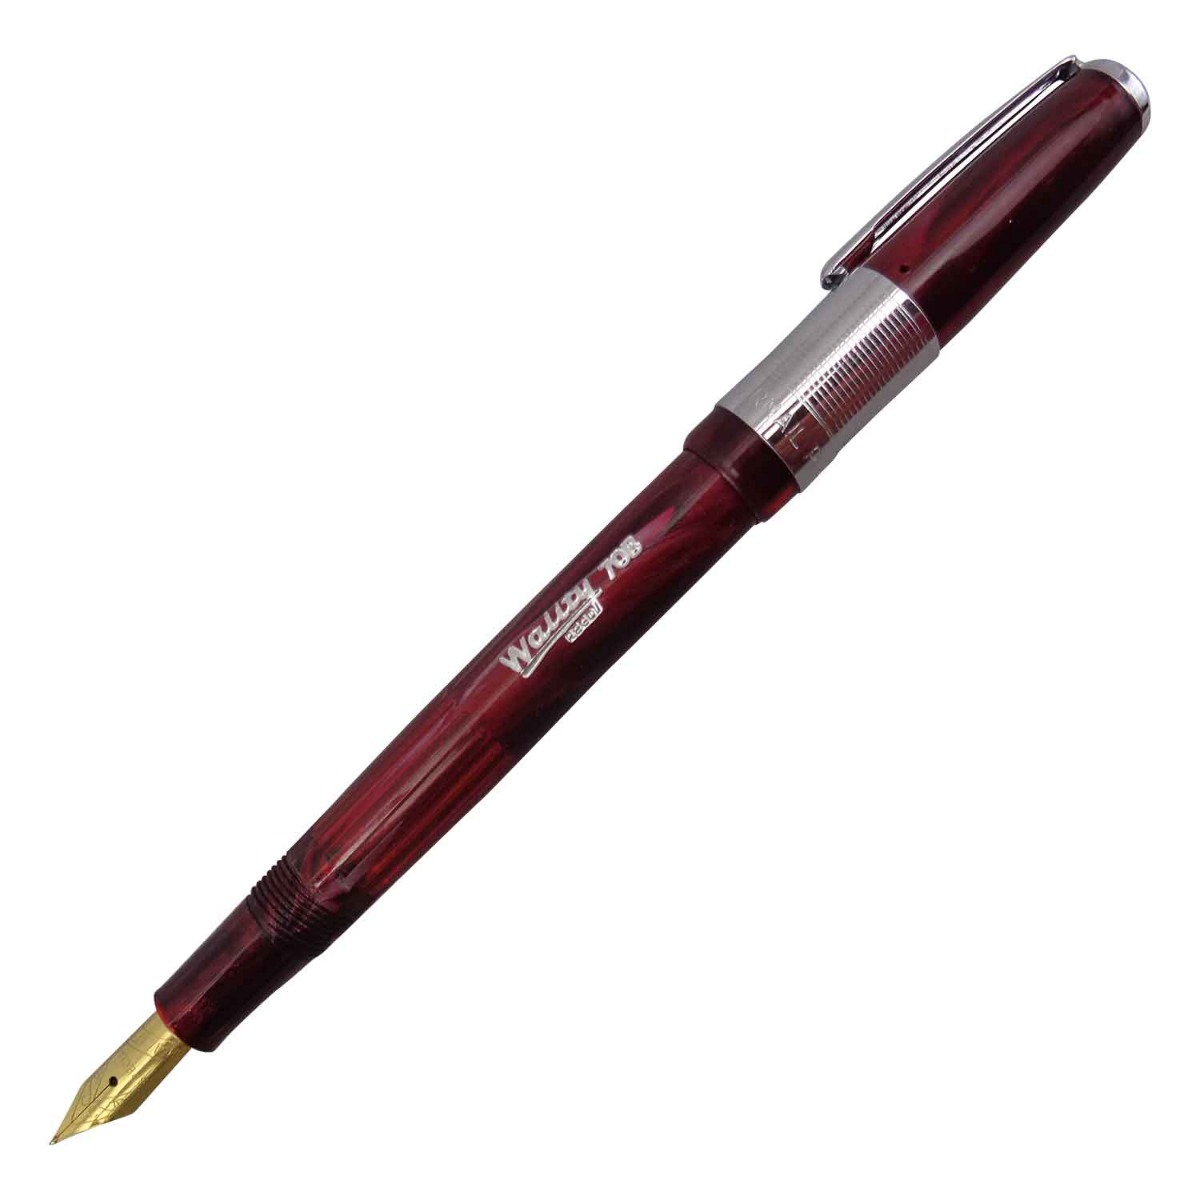 Airmail Wality 70B  Model:16022 Short Ruby Red Color Marble Finish Design Body With Silver Clip Cap Type Fine Tip Fountain Pen